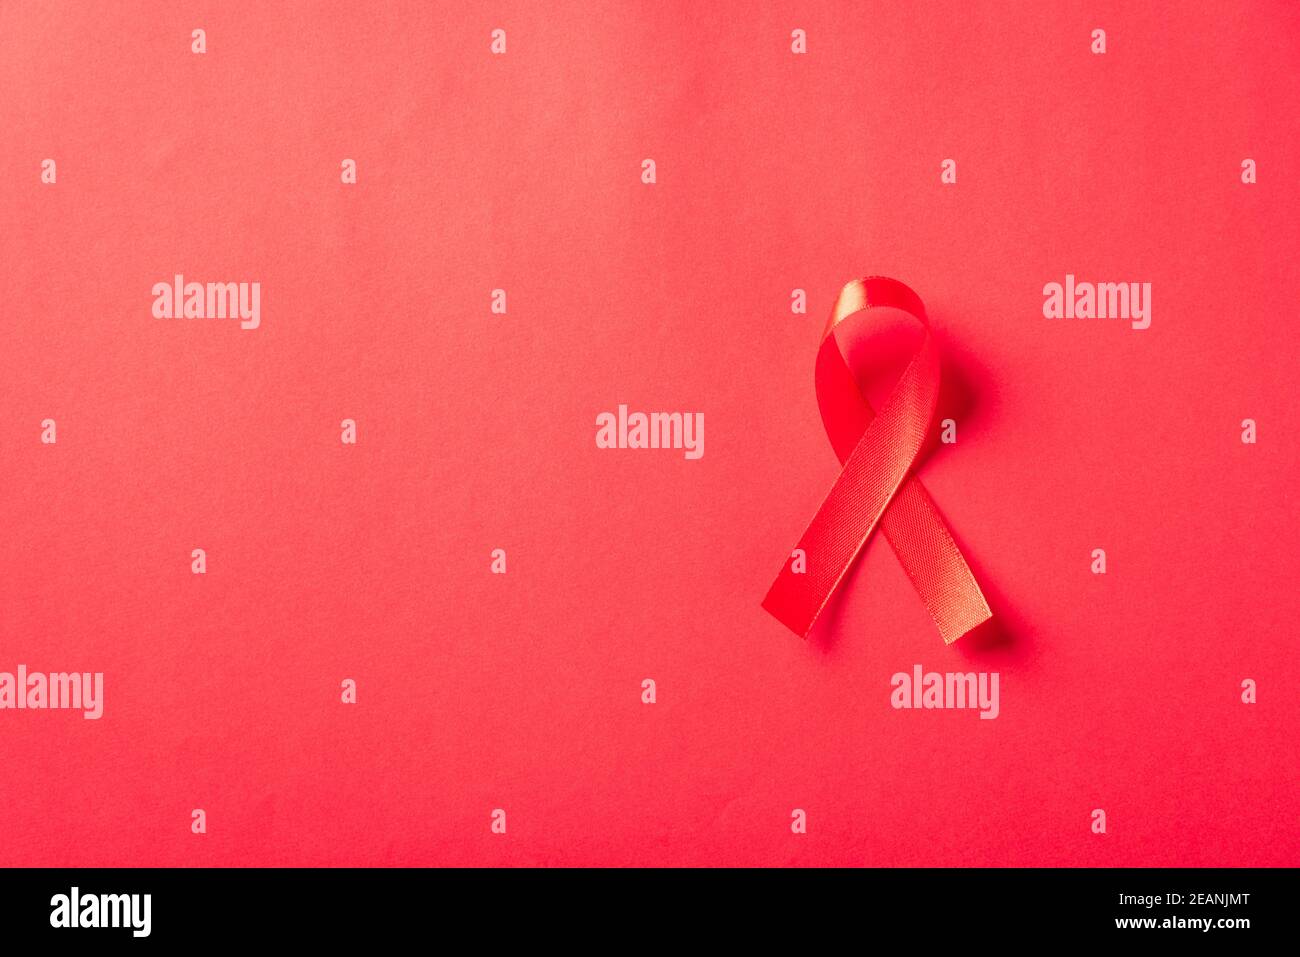 Red bow ribbon symbol HIV, AIDS cancer awareness Stock Photo